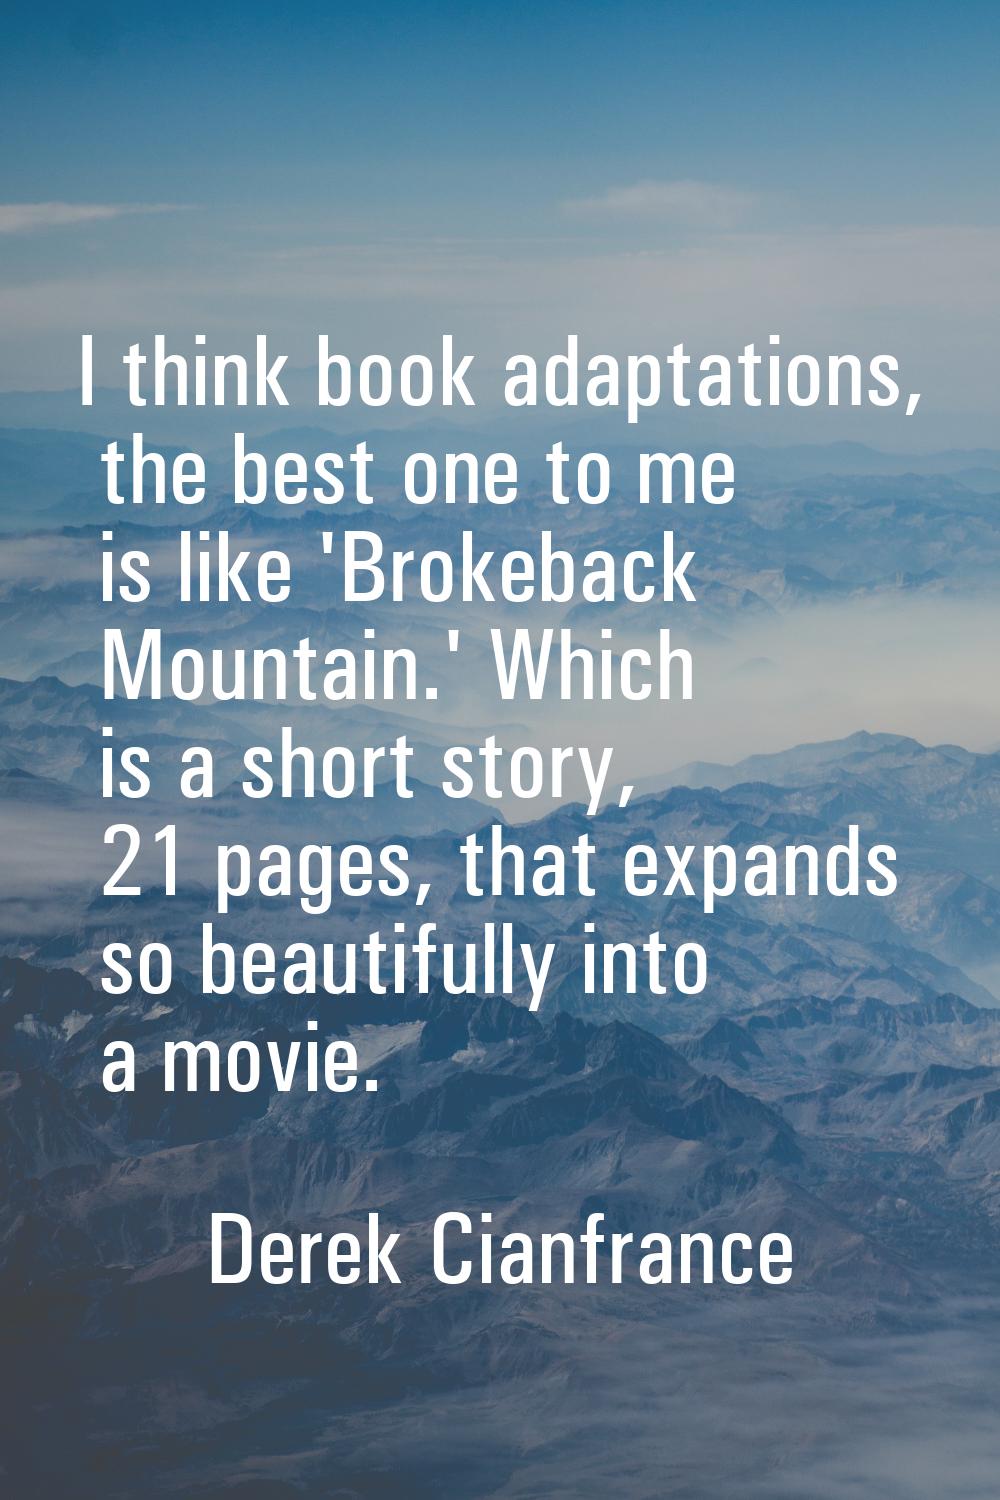 I think book adaptations, the best one to me is like 'Brokeback Mountain.' Which is a short story, 